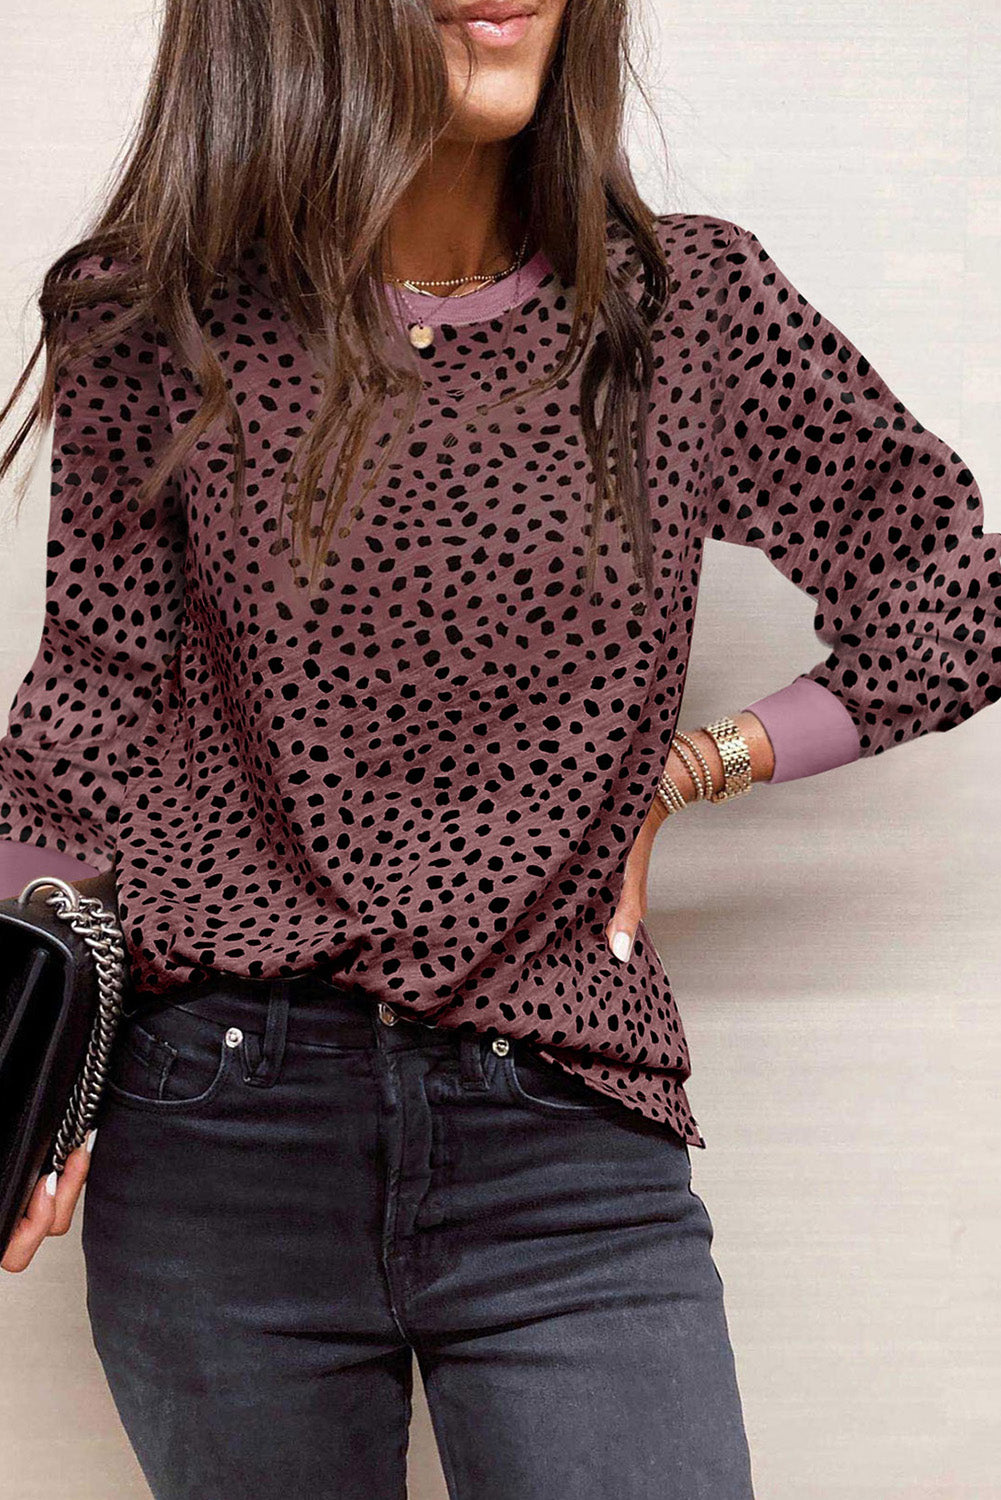 The Spotted Long Sleeve Top